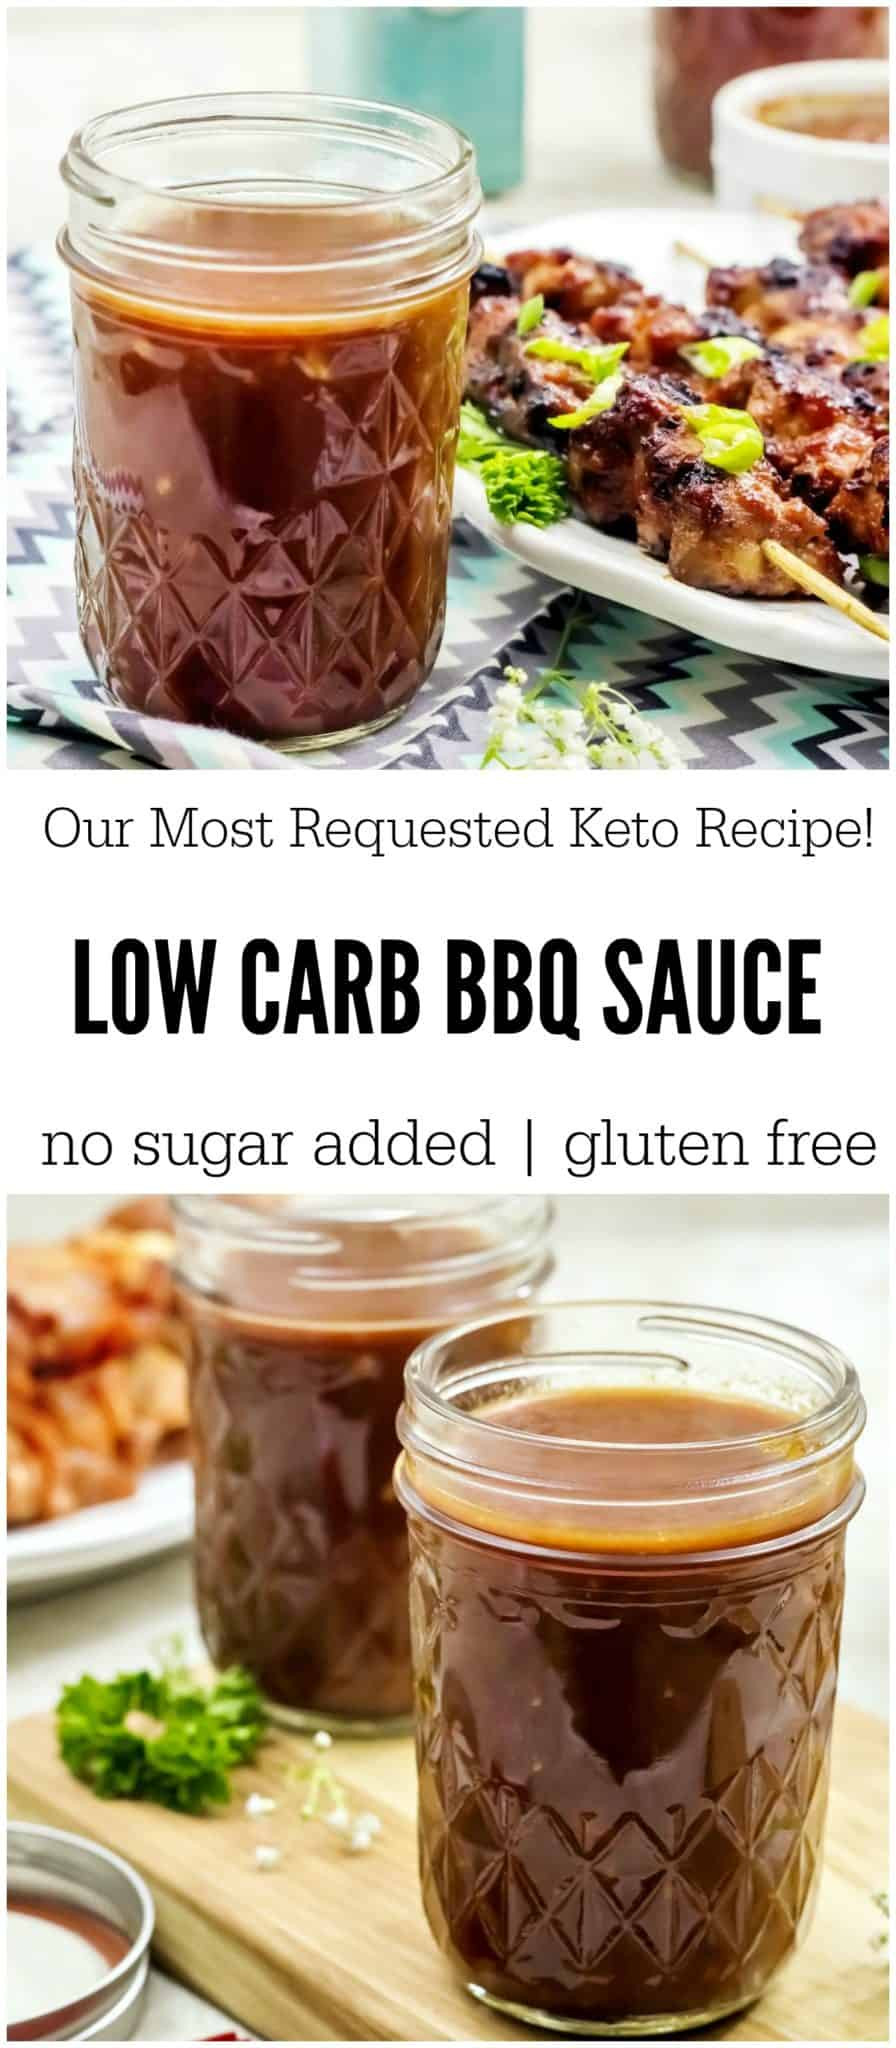 Low Calorie Bbq Sauce Recipe
 Low Carb BBQ Sauce Our Most Requested Keto Friendly Recipe